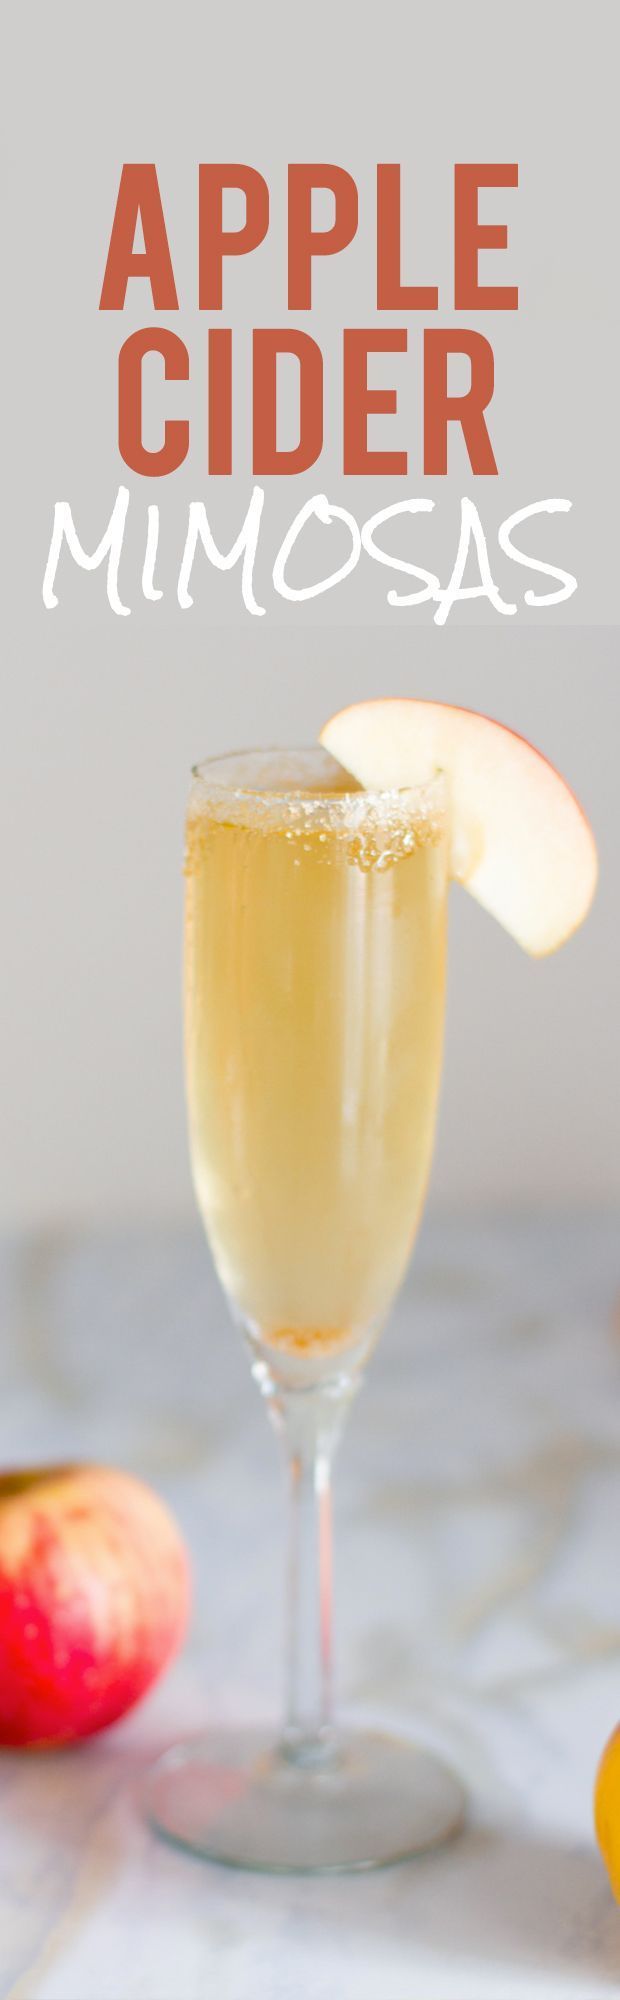 Heres a great Mimosa Drink Recipe for the New years Holiday! back To Her Root